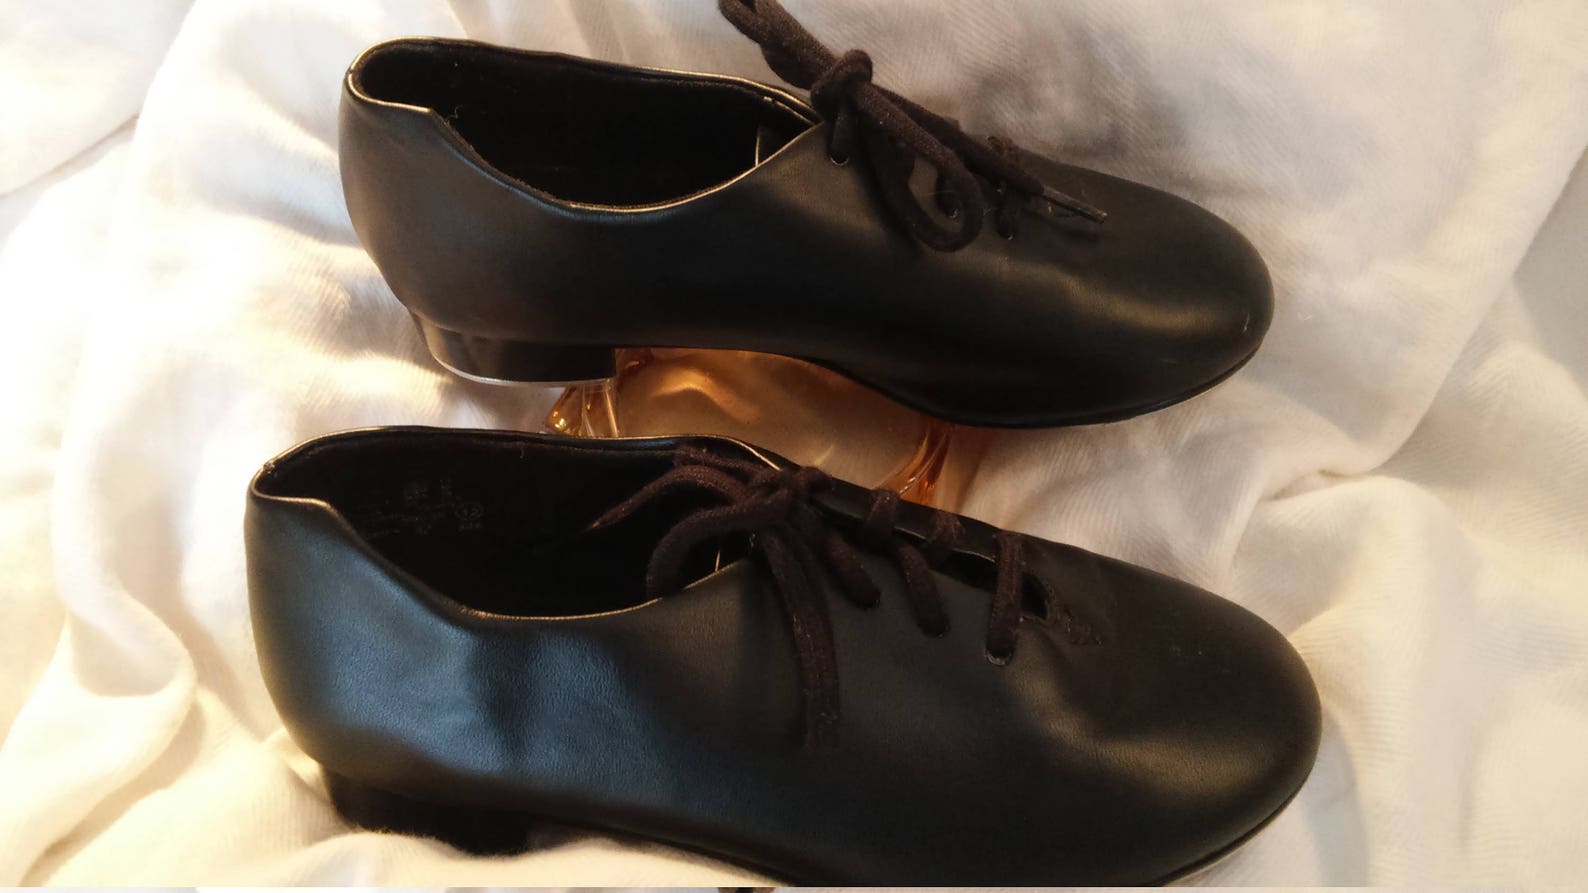 reduced - american ballet theater tap shoes - spotlights - black - girls